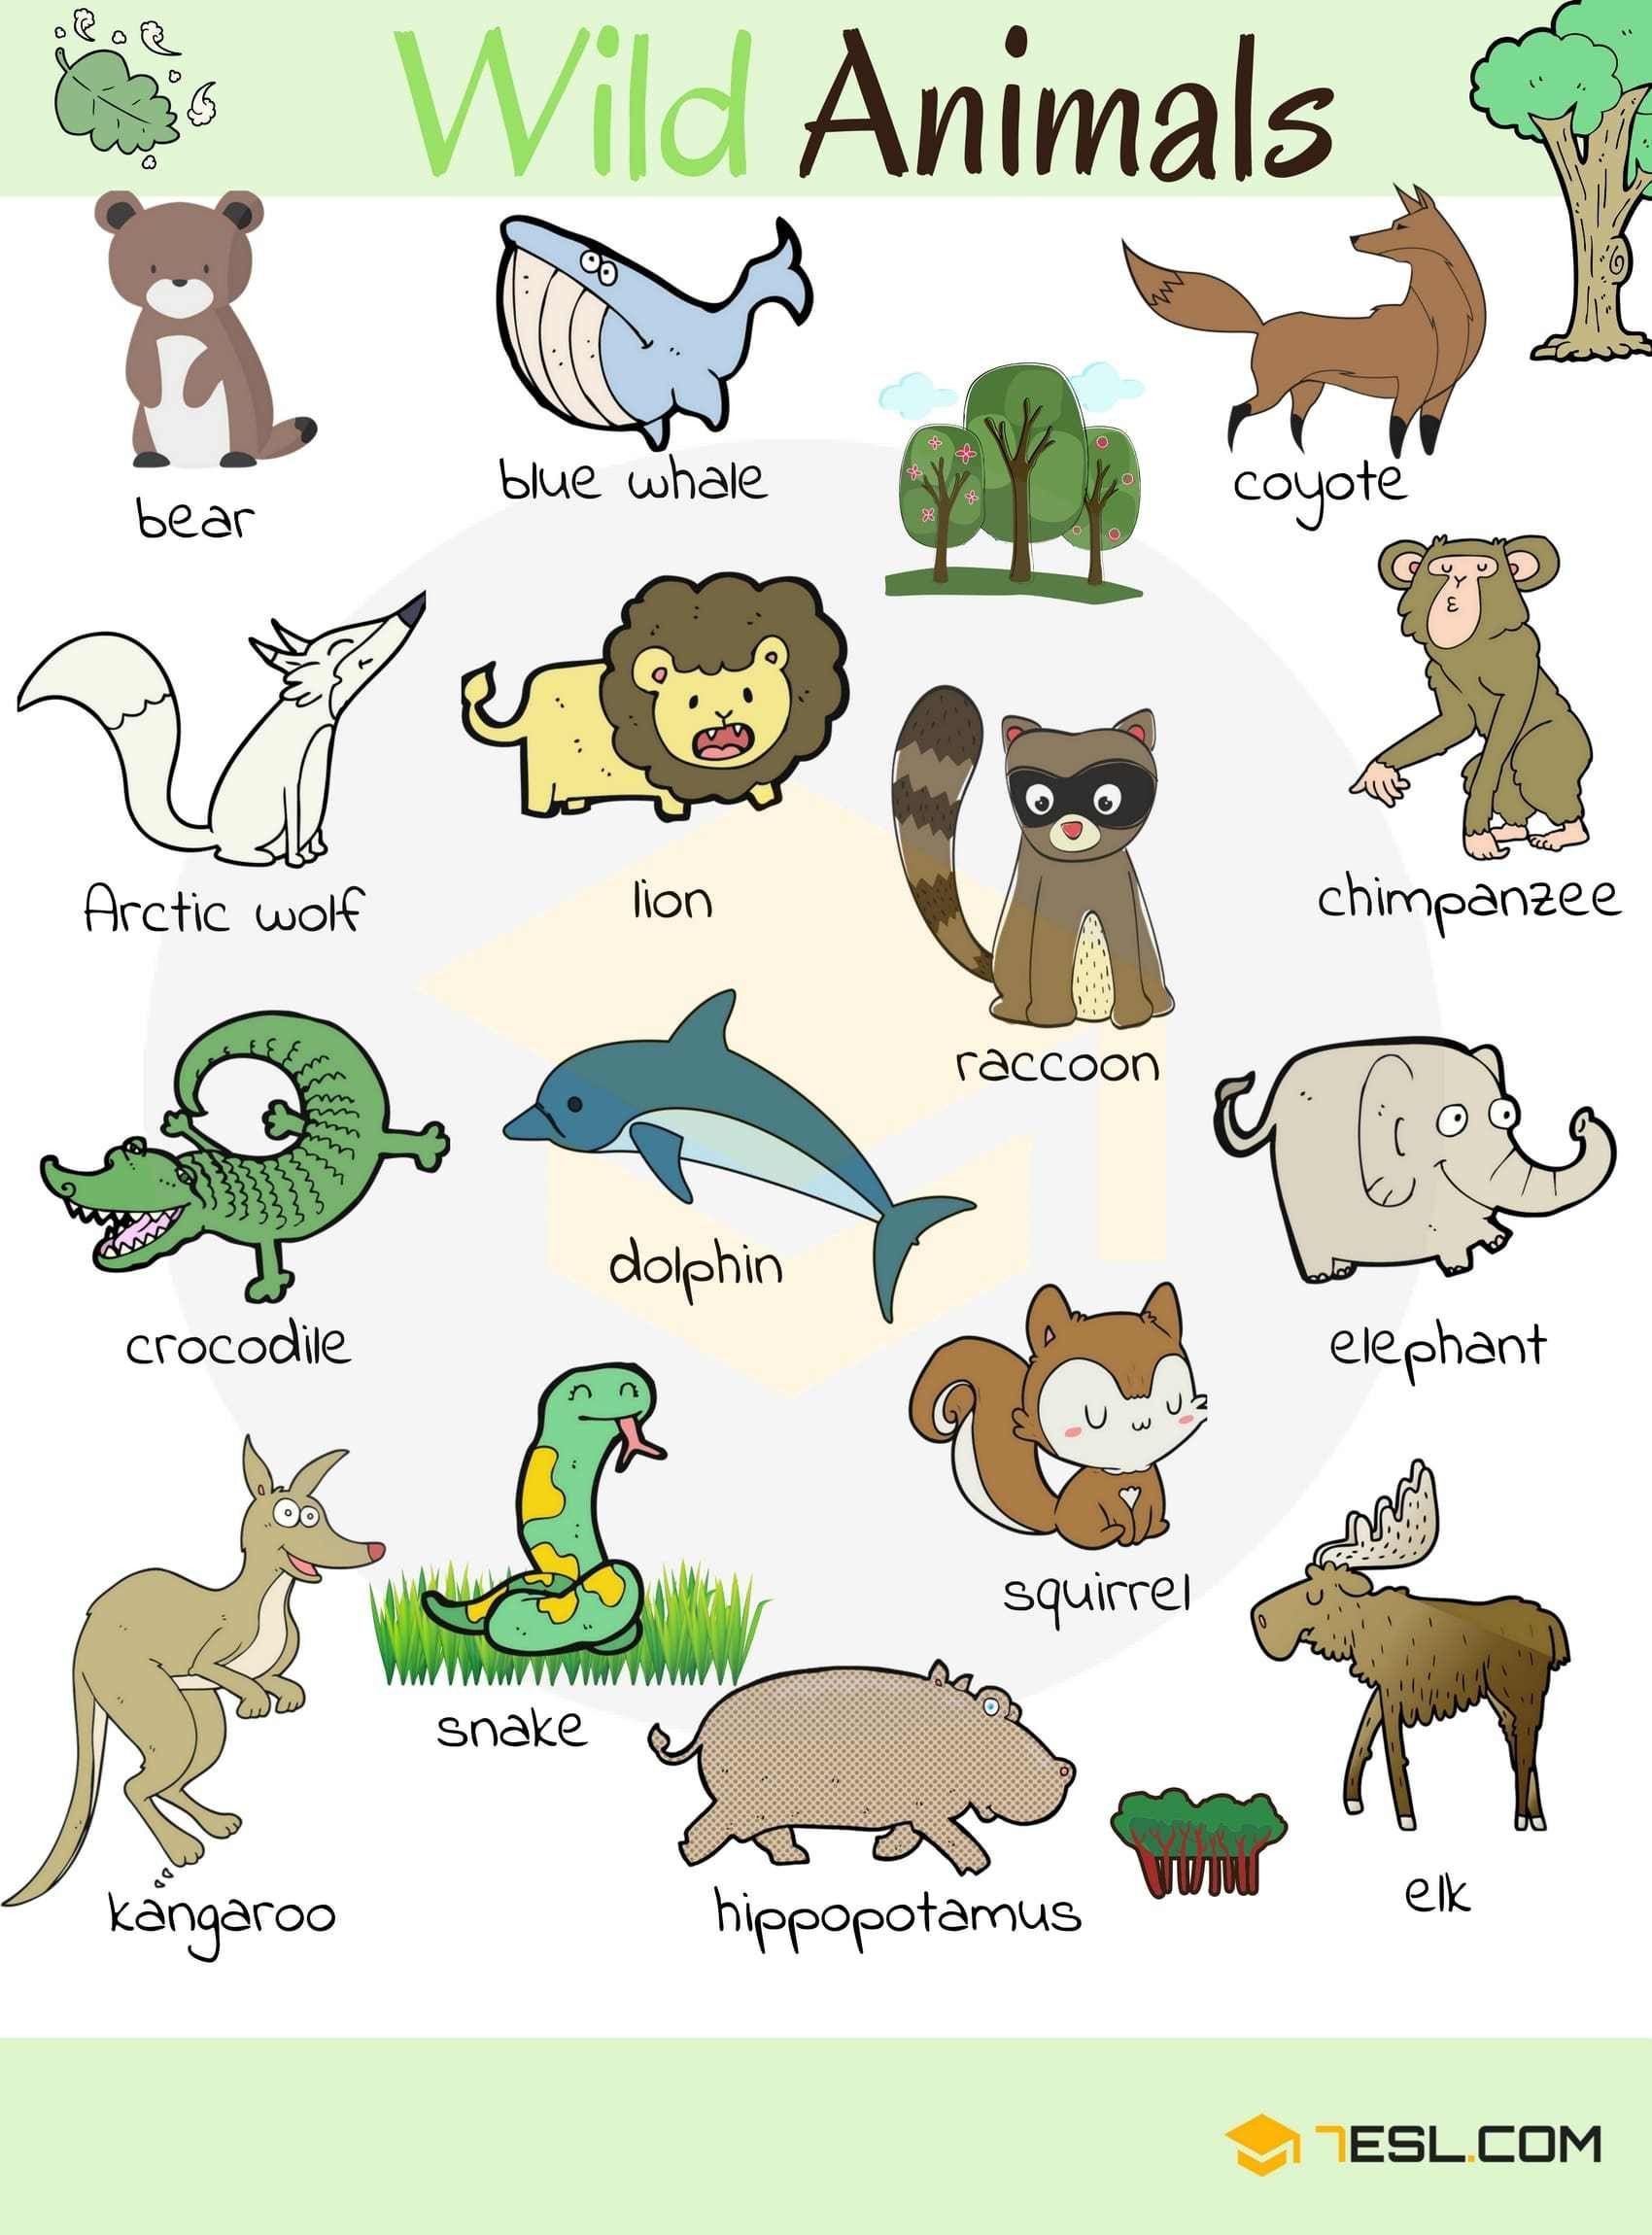 Wild or Domestic Animals Worksheets